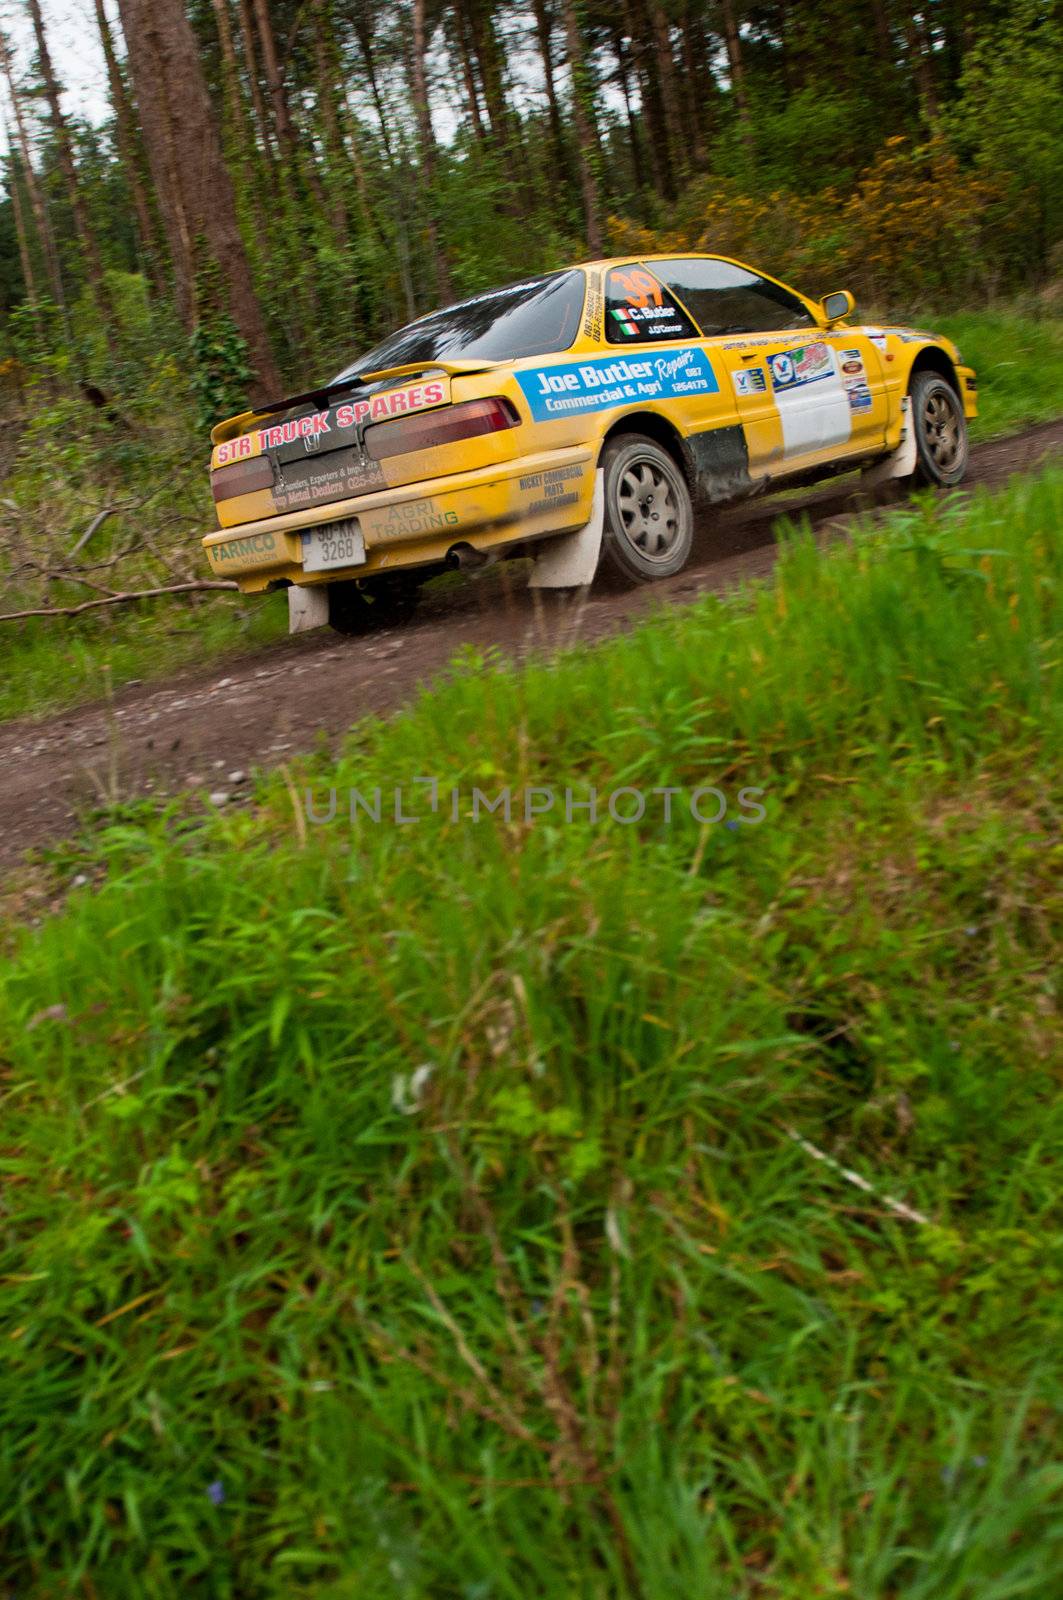 MALLOW, IRELAND - MAY 19: C. Butler driving Honda Integra at the Jim Walsh Cork Forest Rally on May 19, 2012 in Mallow, Ireland. 4th round of the Valvoline National Forest Rally Championship.